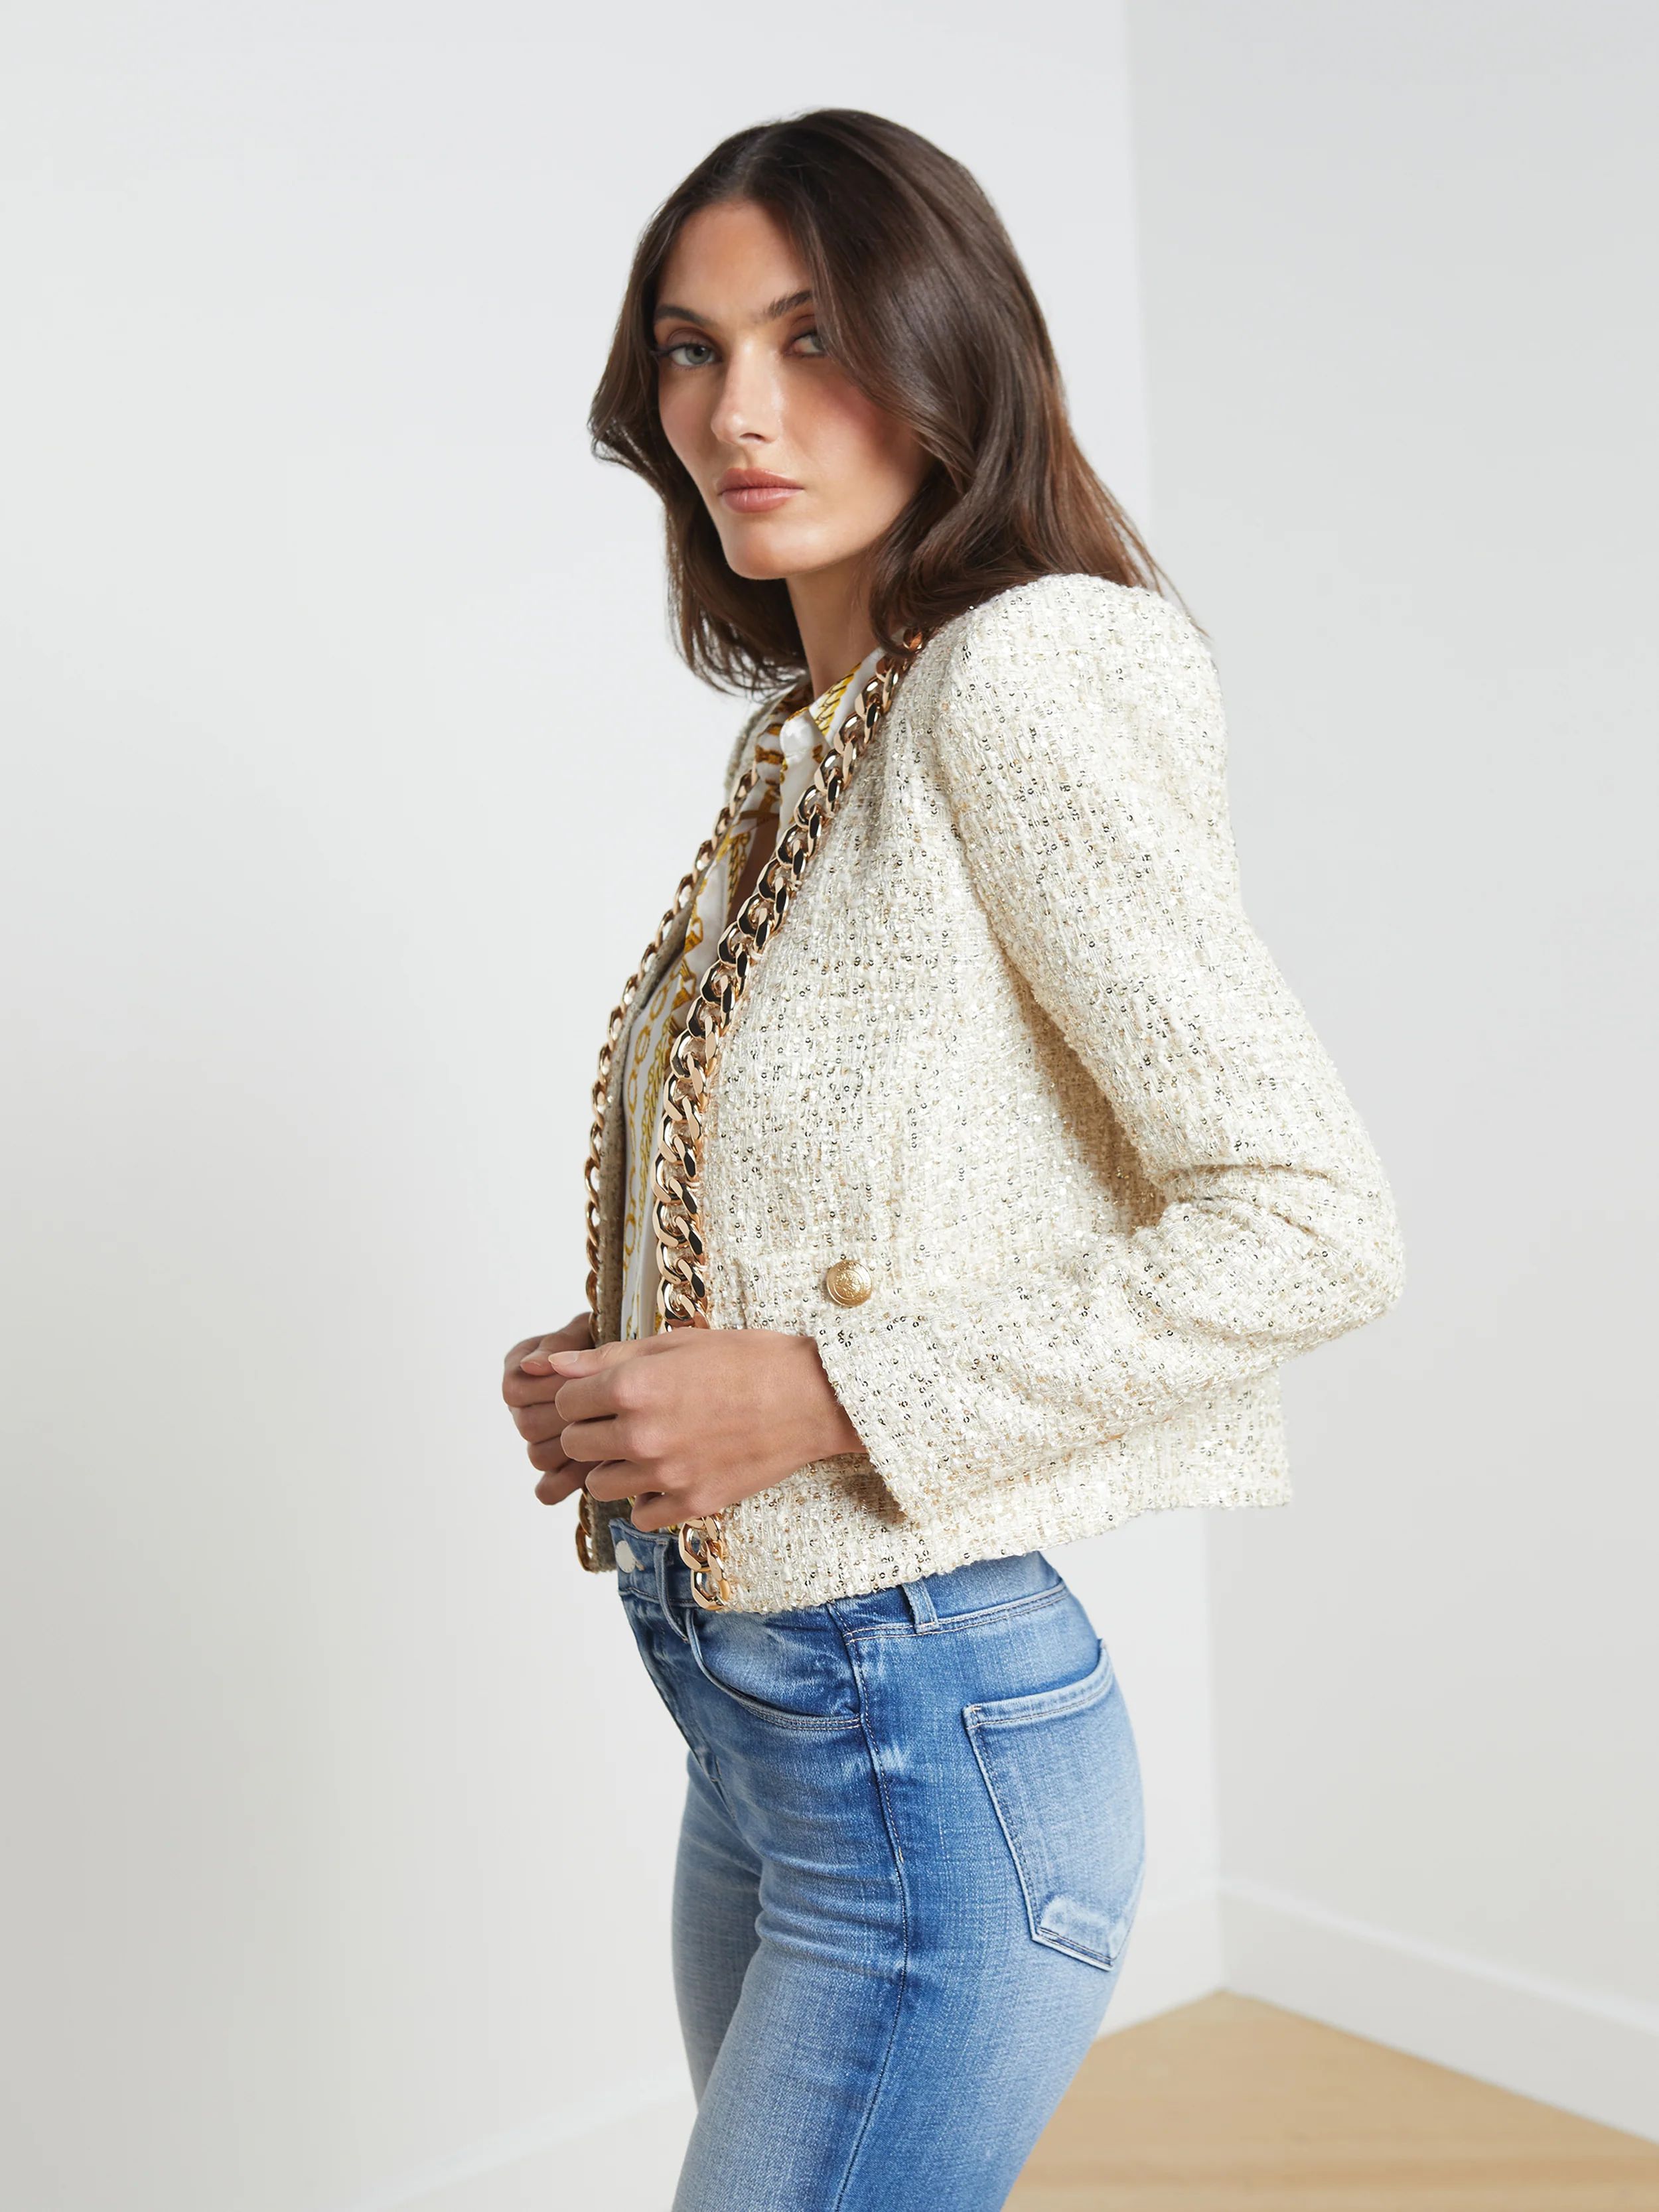 L'AGENCE Greta Chain Jacket in Champagne/Gold | L'Agence